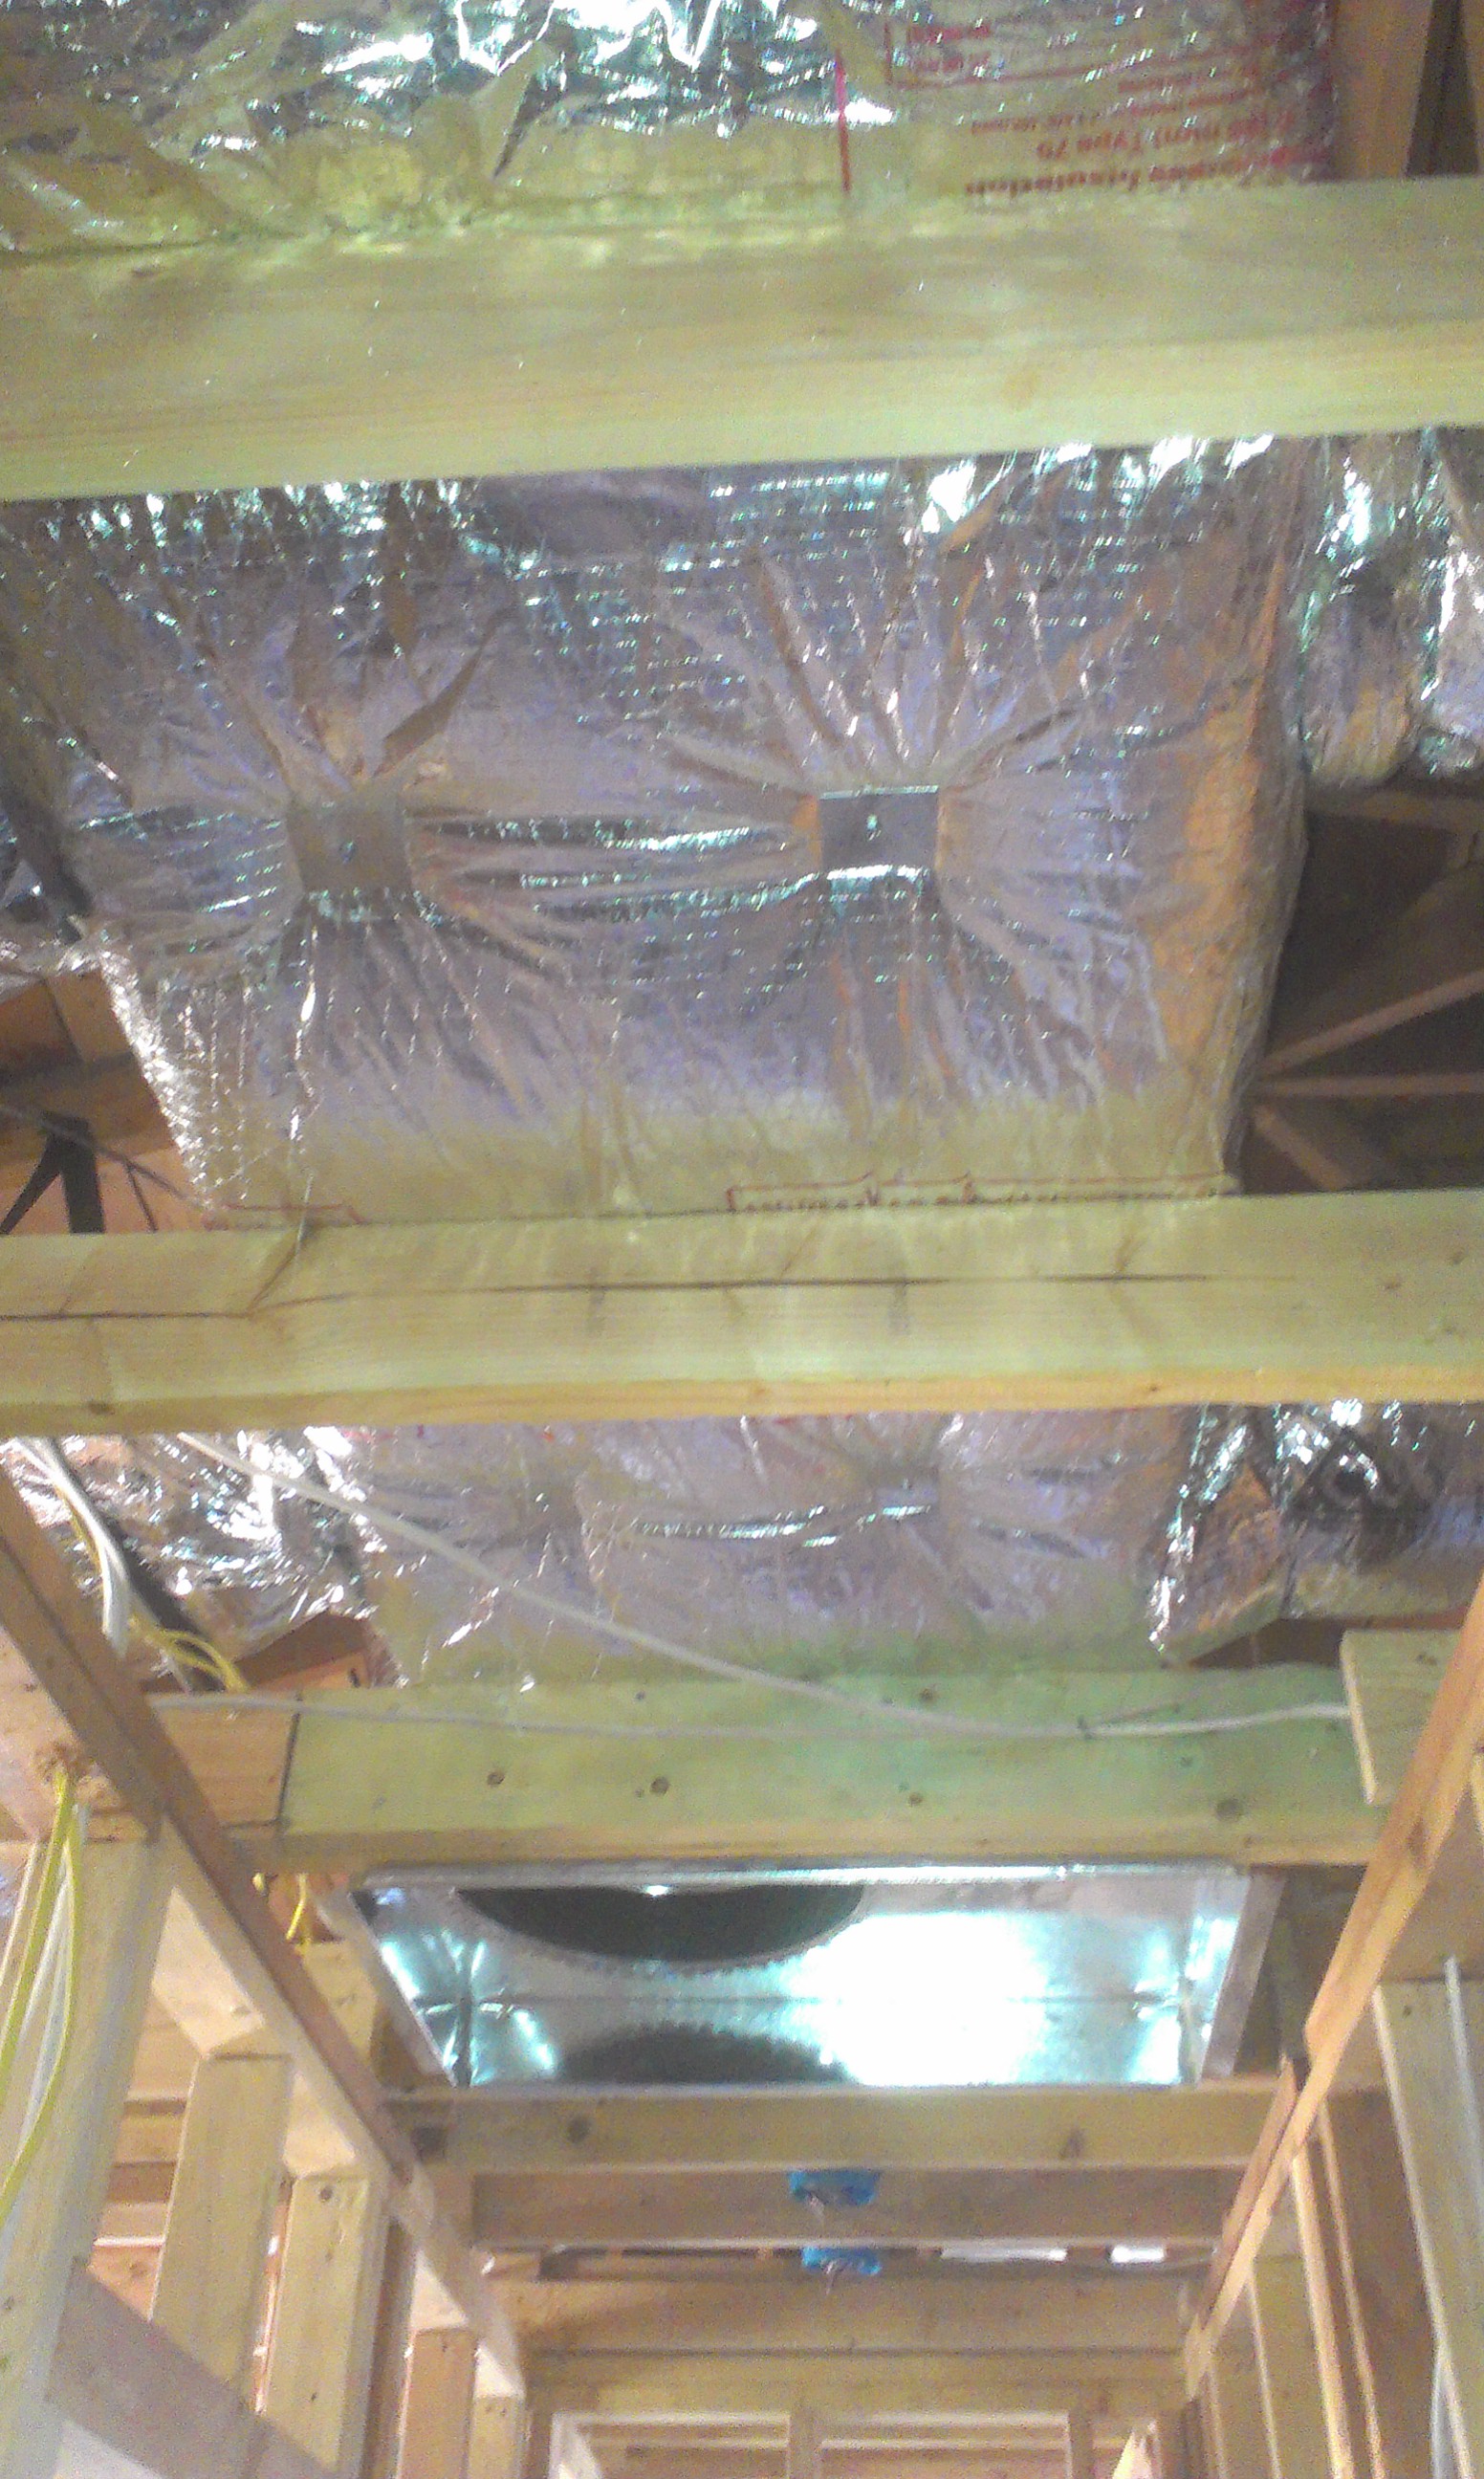 All new ducts installed in a central Phoenix home during renovation